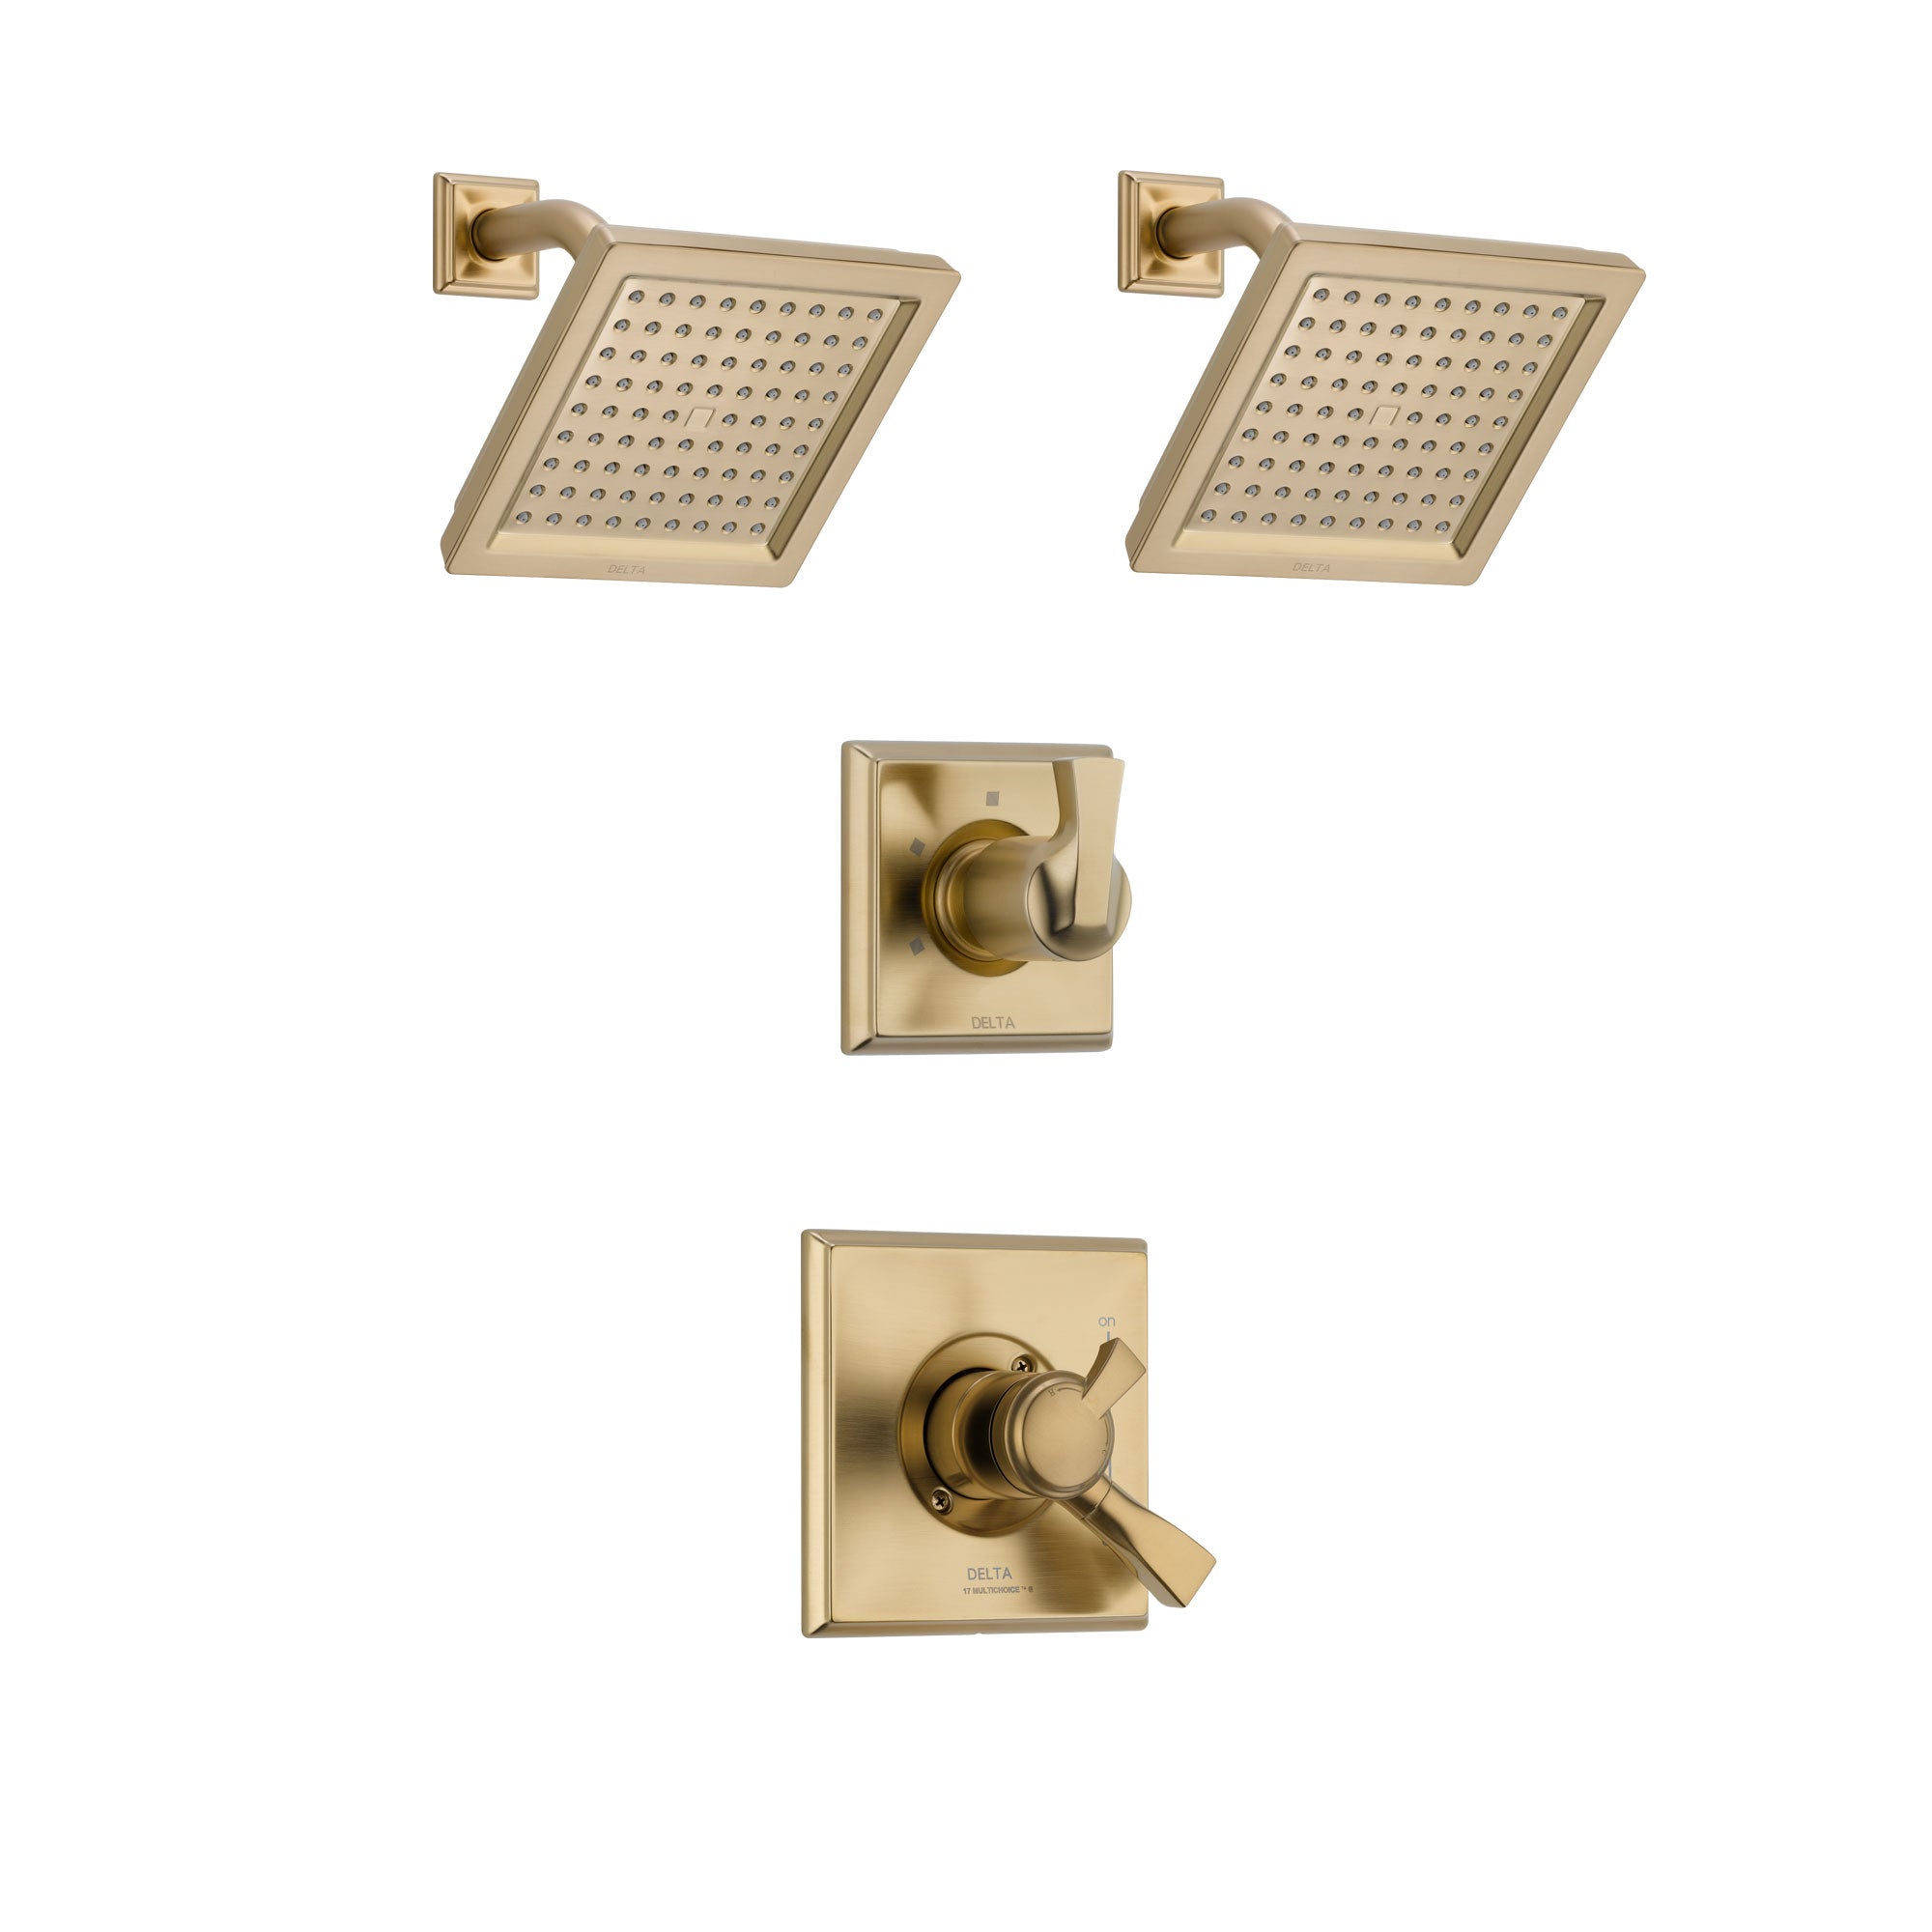 Delta Dryden Champagne Bronze Finish Shower System with Dual Control Handle, 3-Setting Diverter, 2 Showerheads SS17251CZ4